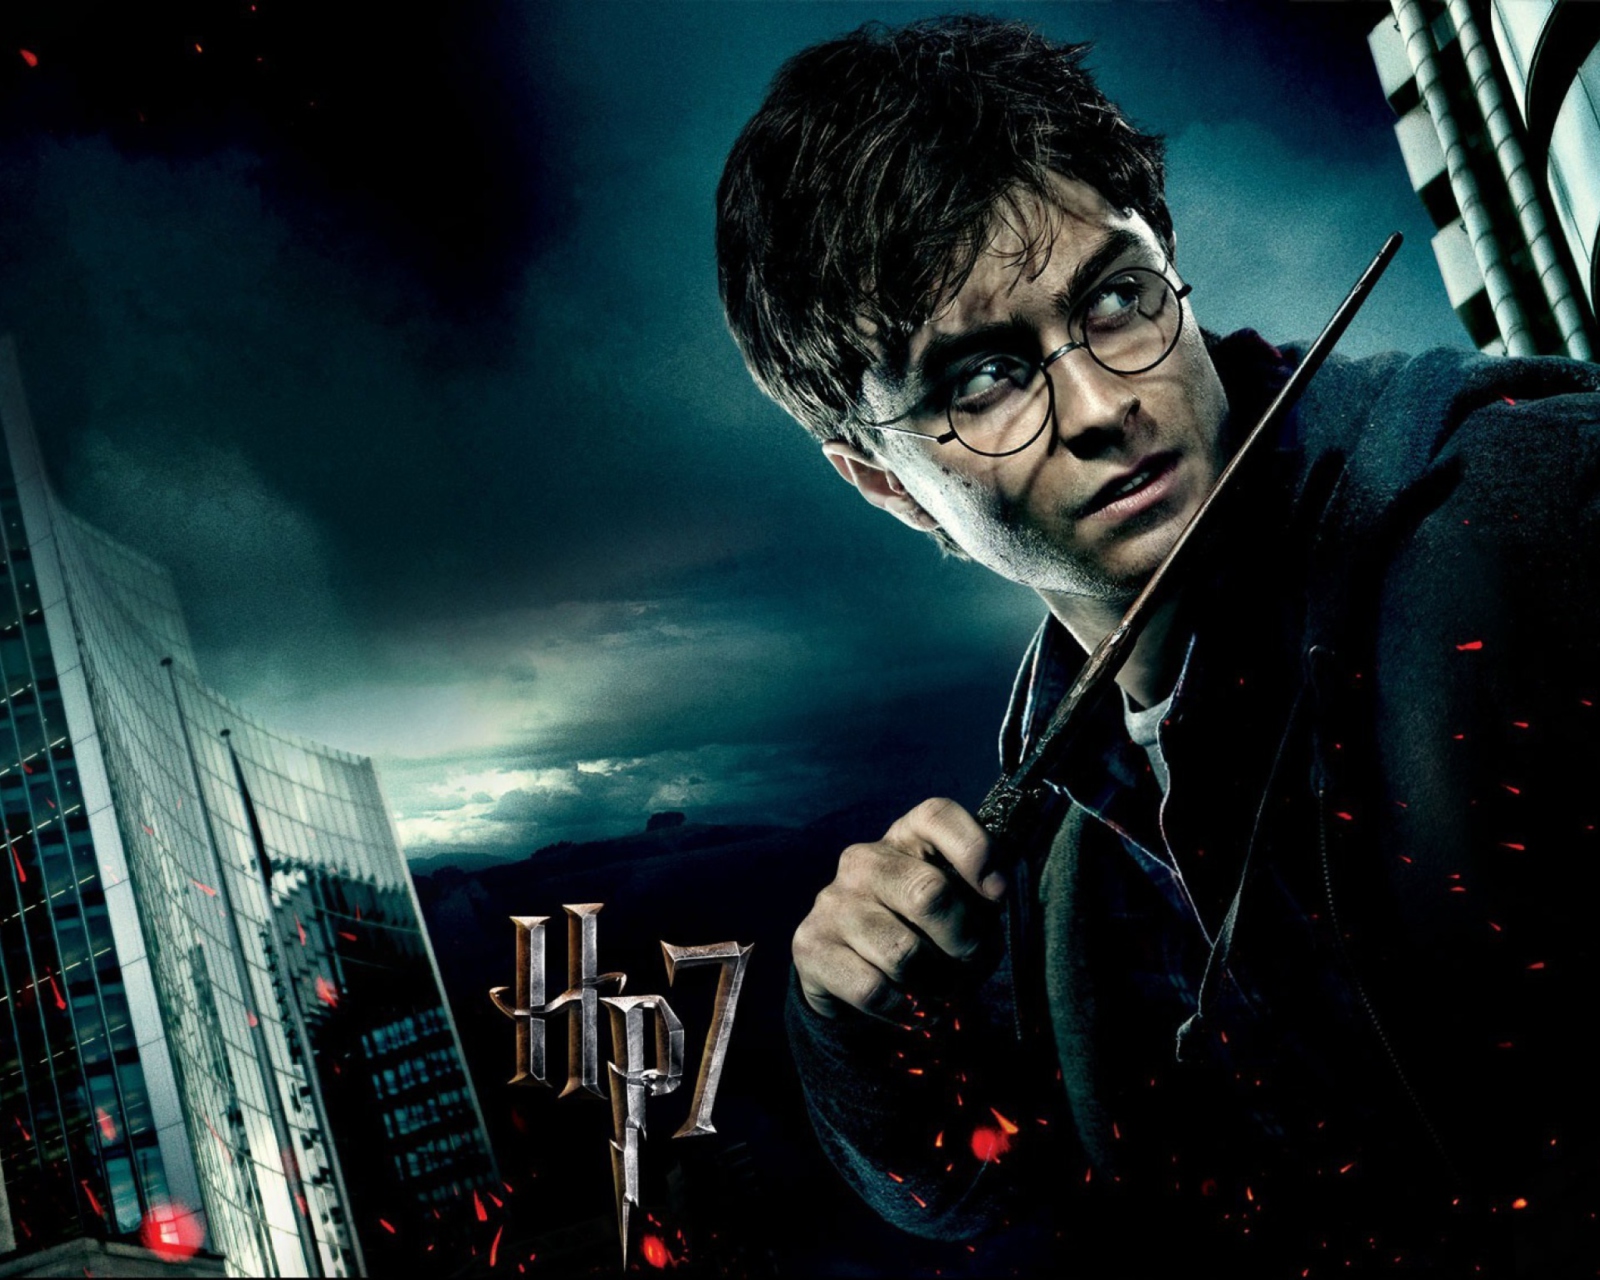 Harry Potter And The Deathly Hallows Part-1 wallpaper 1600x1280